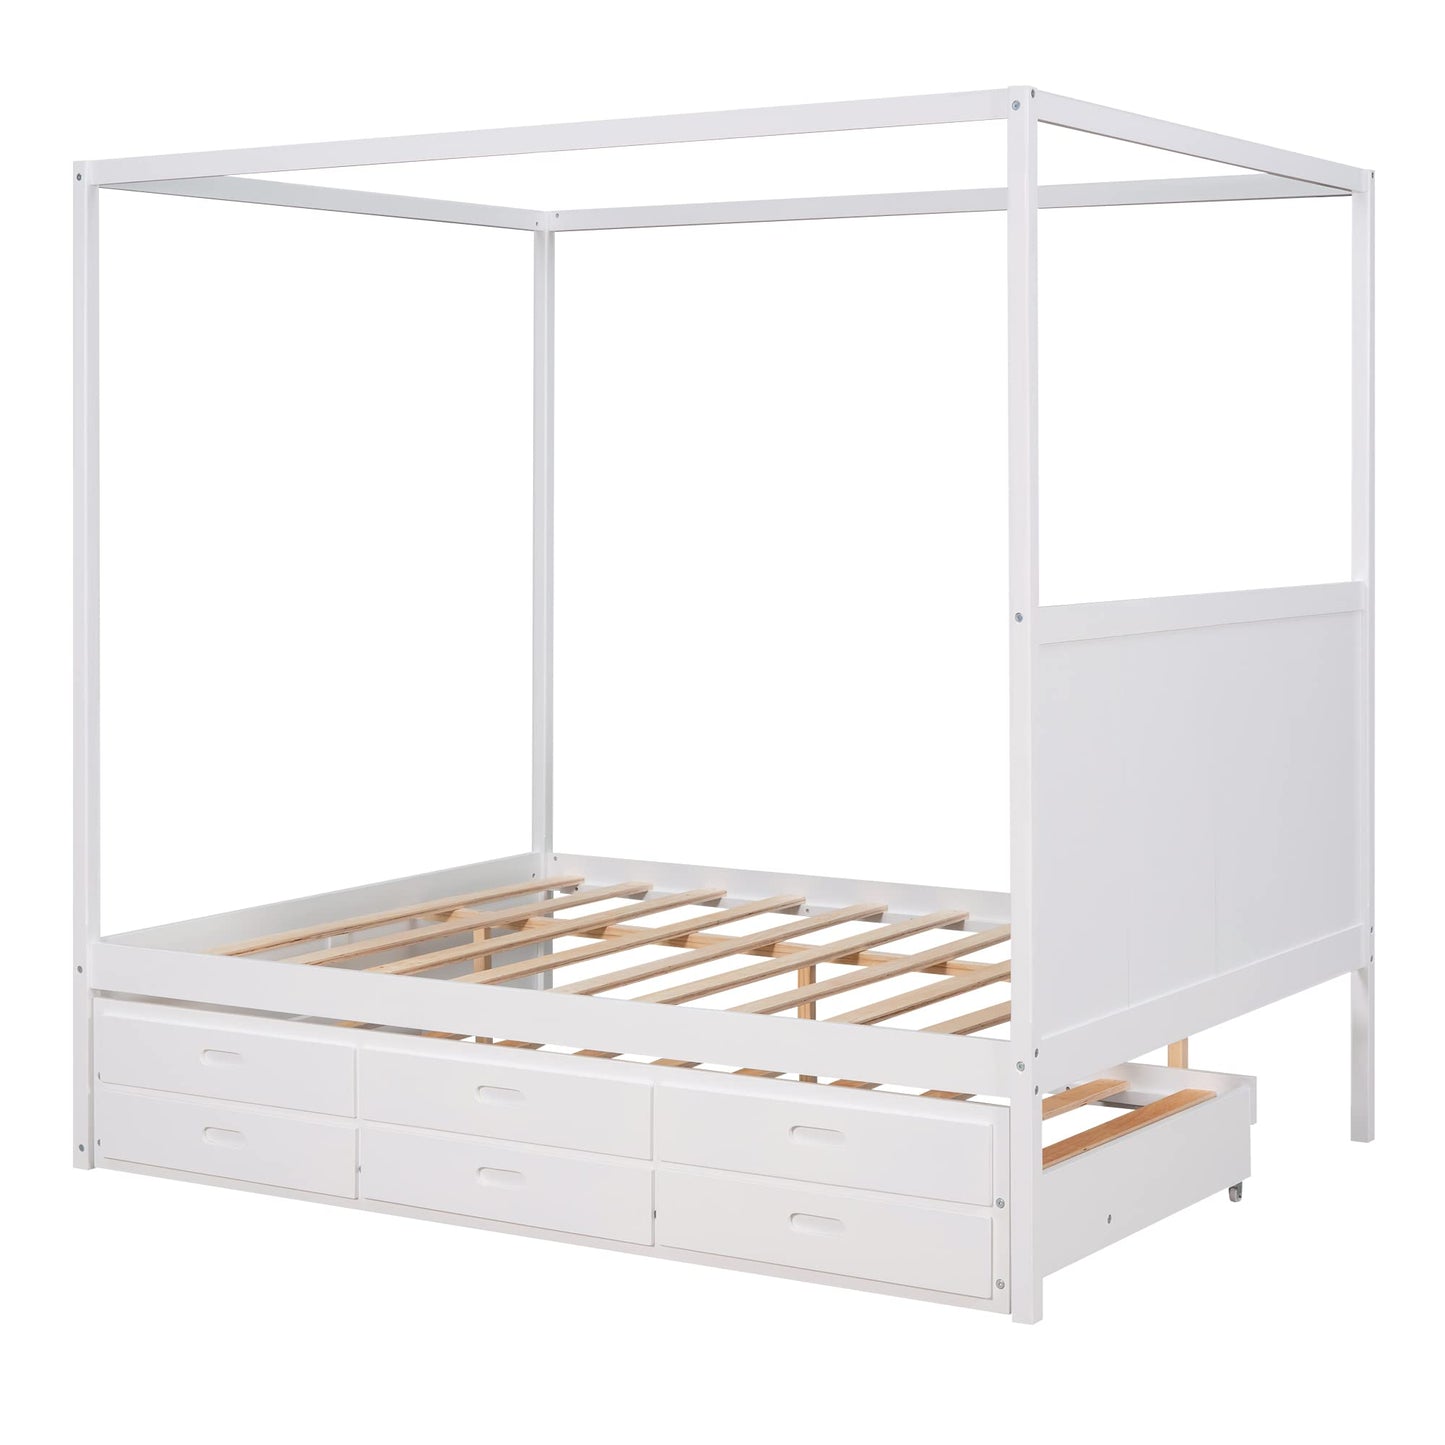 Favfurish Queen Size Canopy Platform Bed with Twin-Size Trundle and Three Storage Drawers,Easy to Assemble,Wood Bed-Frame for Children Teens Adults,Suitable for Bedroom,White